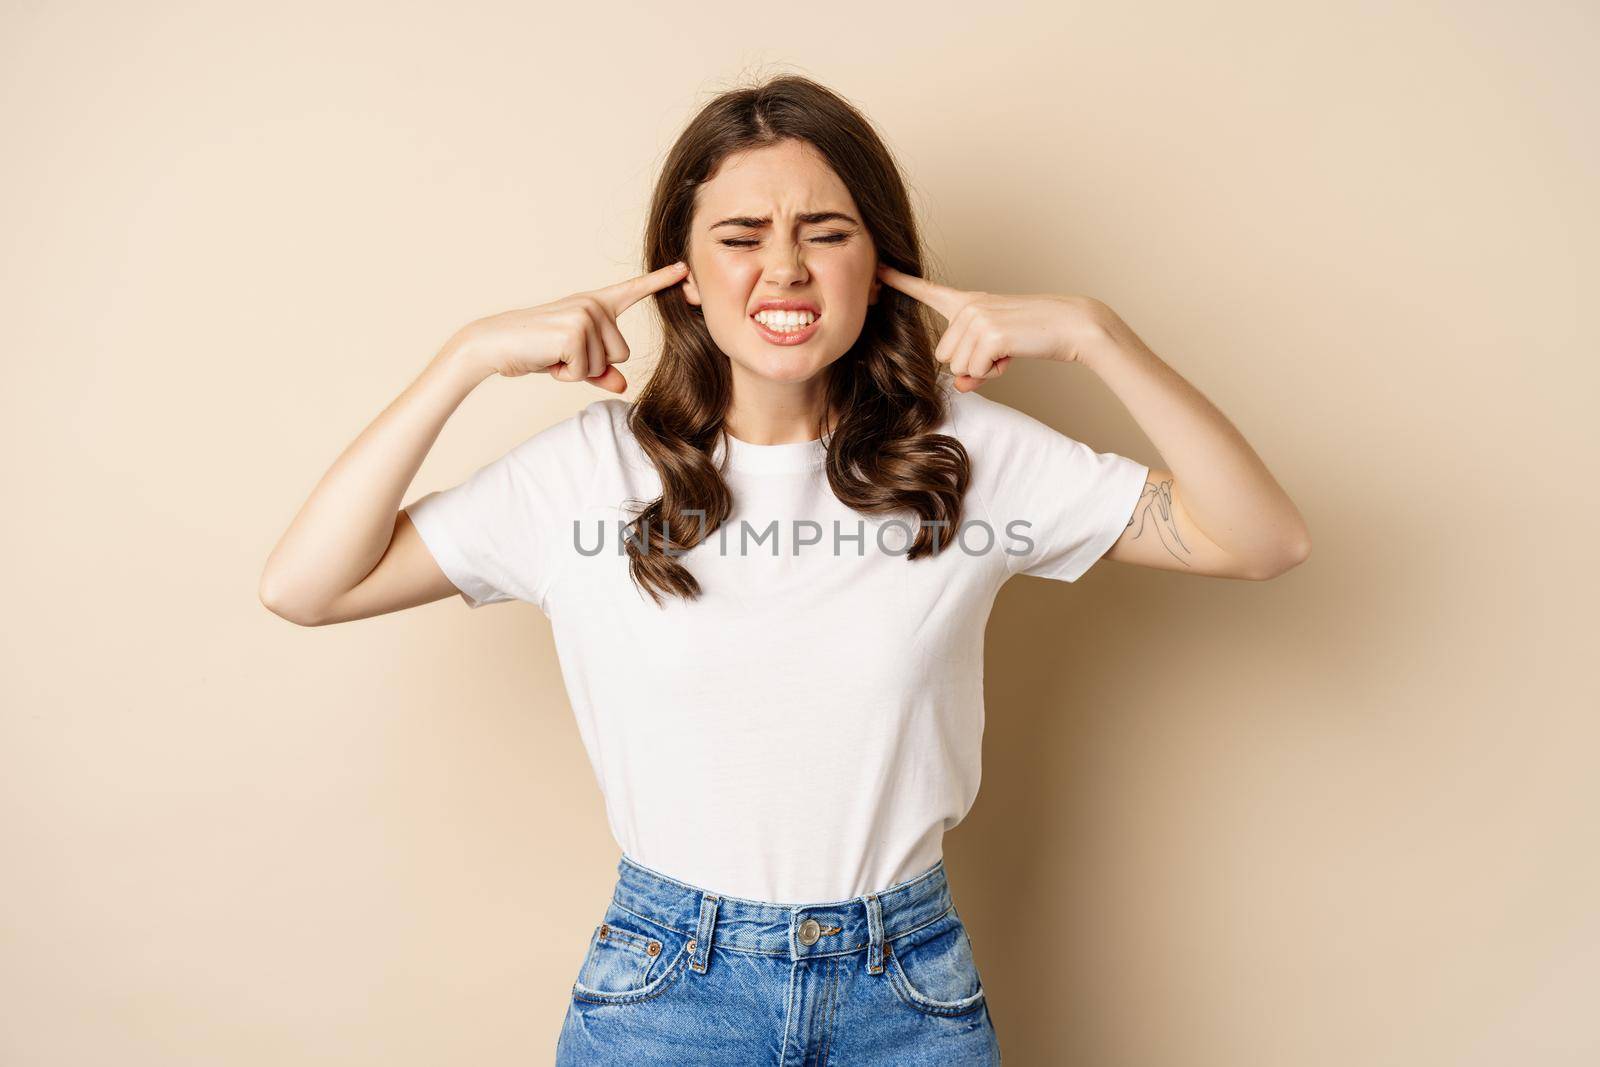 Annoyed young woman shut ears from loud noise, feeling discomfort and complaining, standing against beige background.